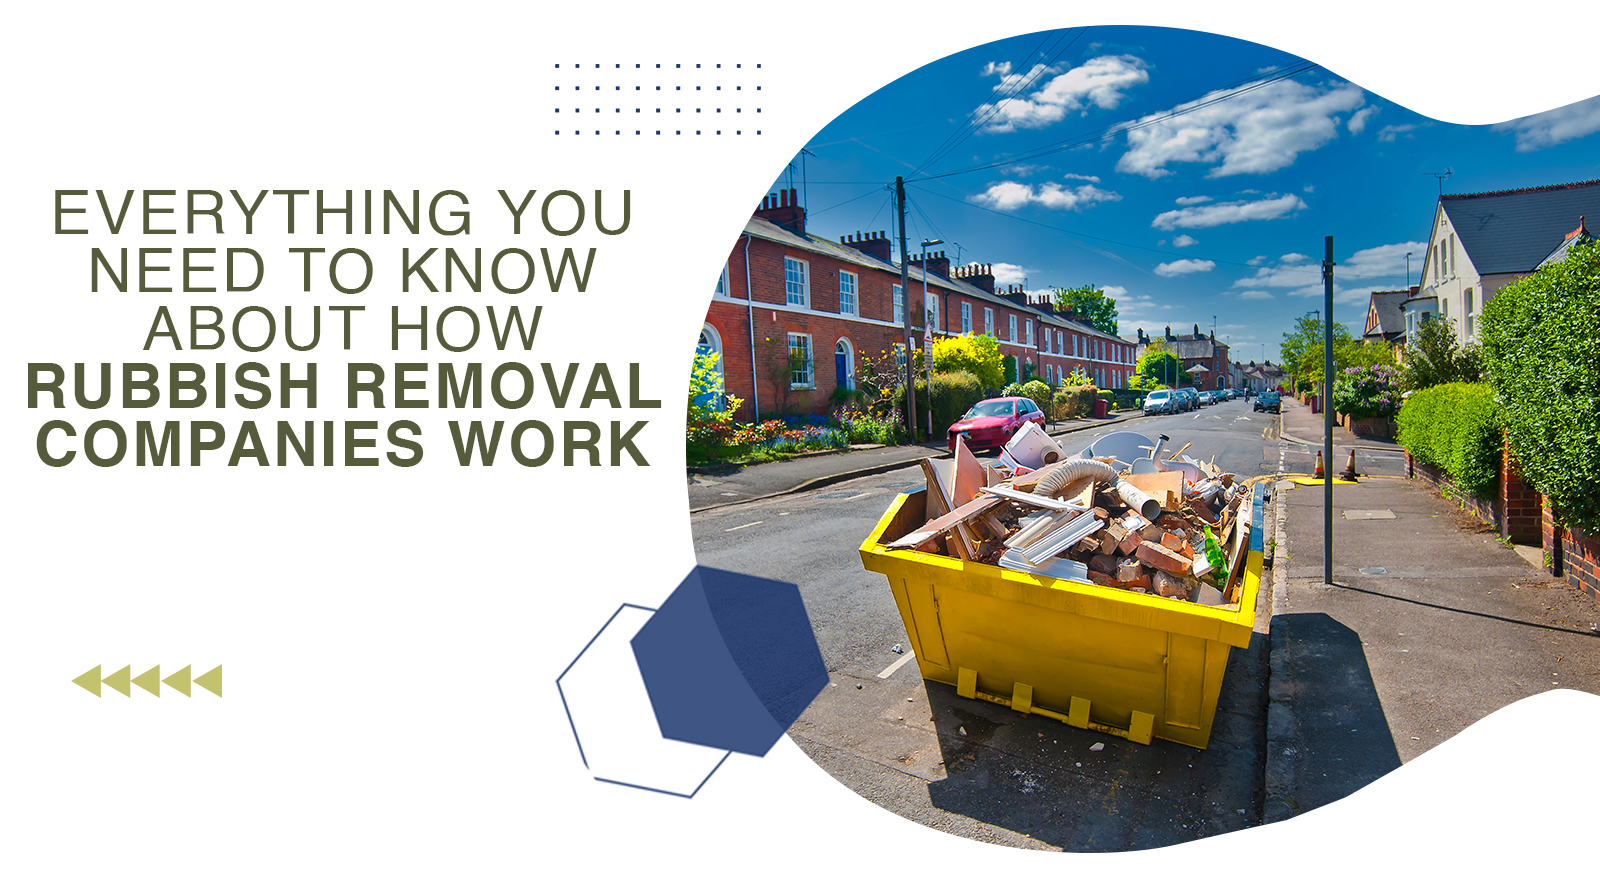 Everything You Need to Know about How Rubbish Removal Companies Work